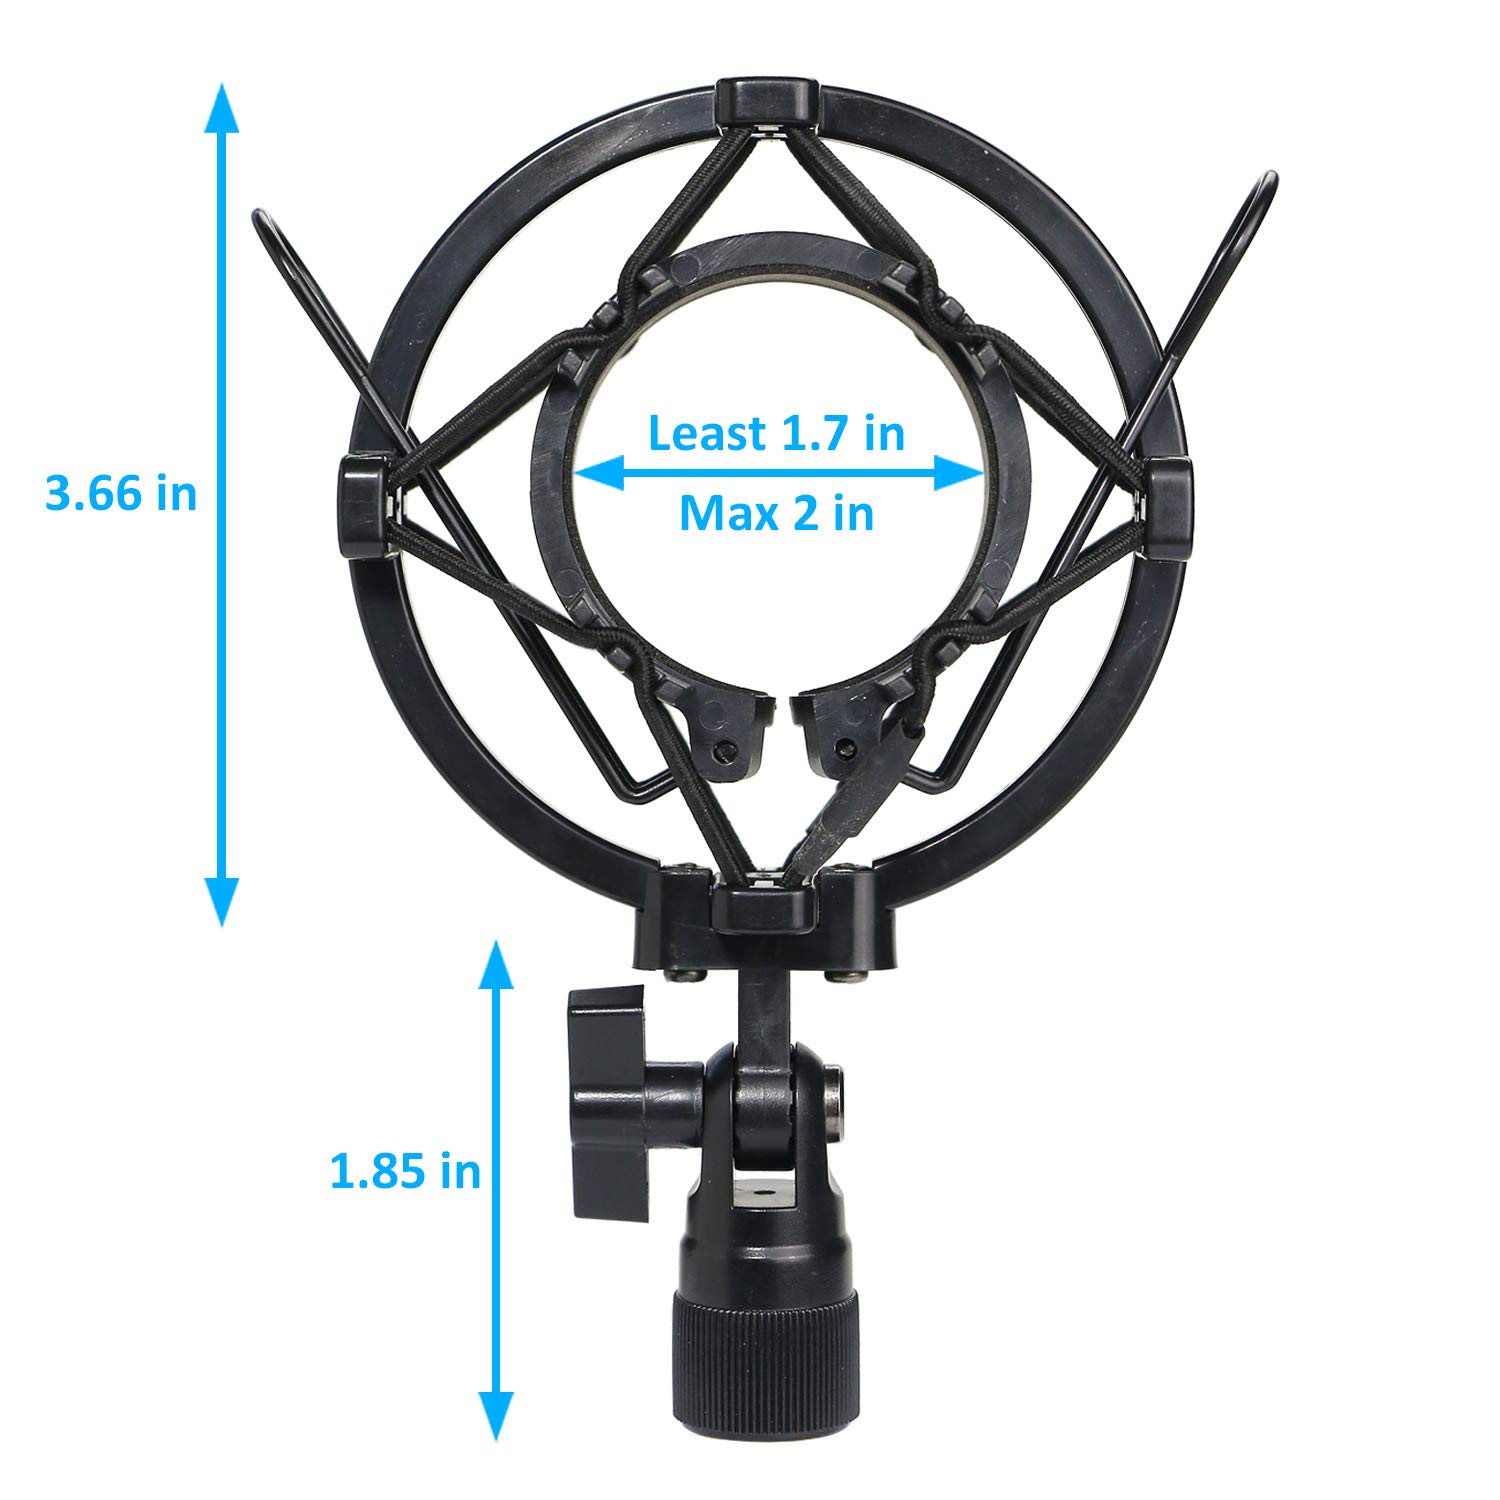 SUNMON AT2020 Shock Mount, Shock Mount Stand Reduces Vibration Noise for Audio Technica AT2020 AT2035 AT4040 AT2020USB ATR2500x Condenser Micphone